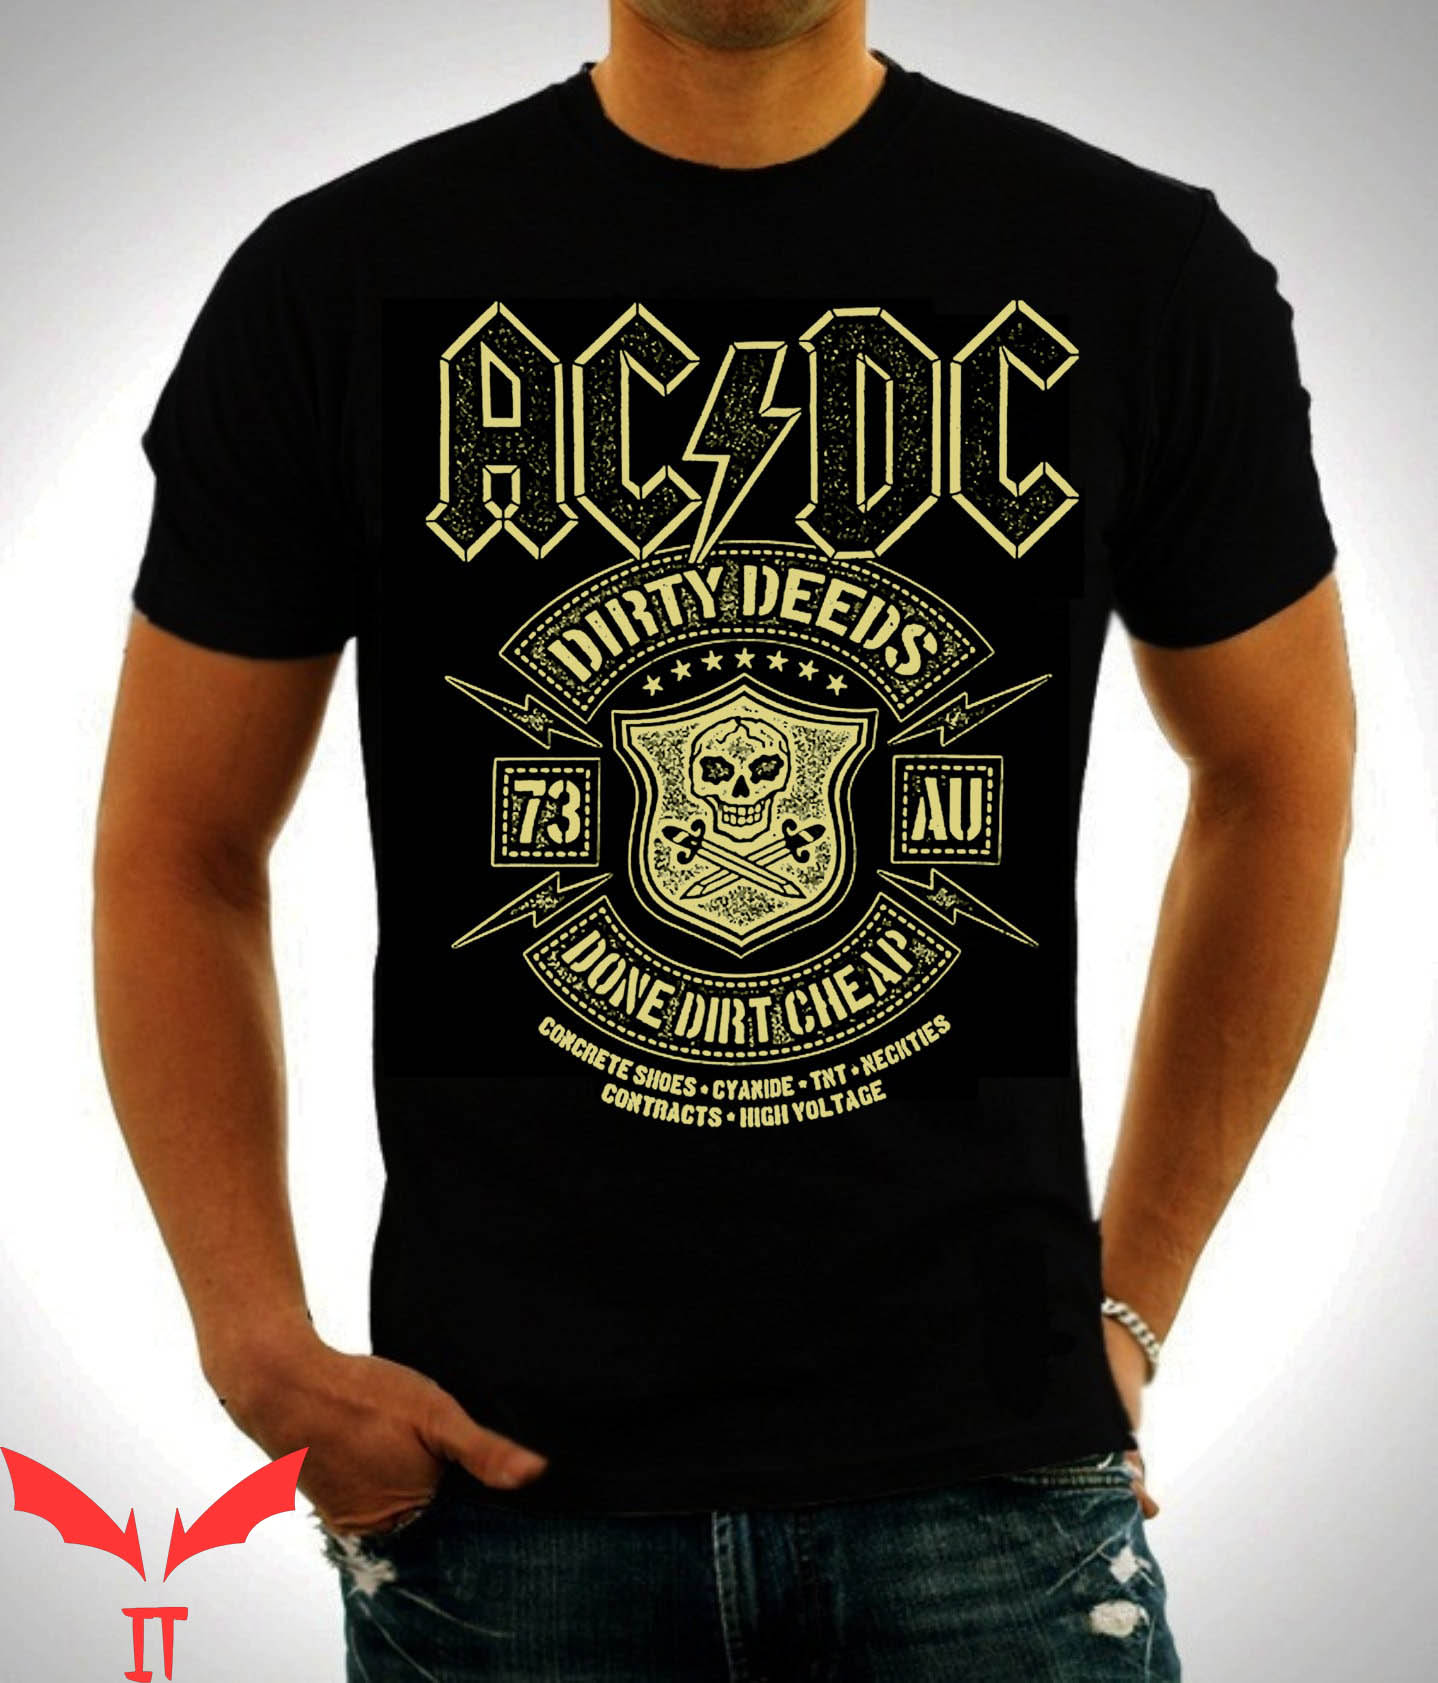 AC DC Back In Black T-Shirt Dirty Deeds Done Album Rock